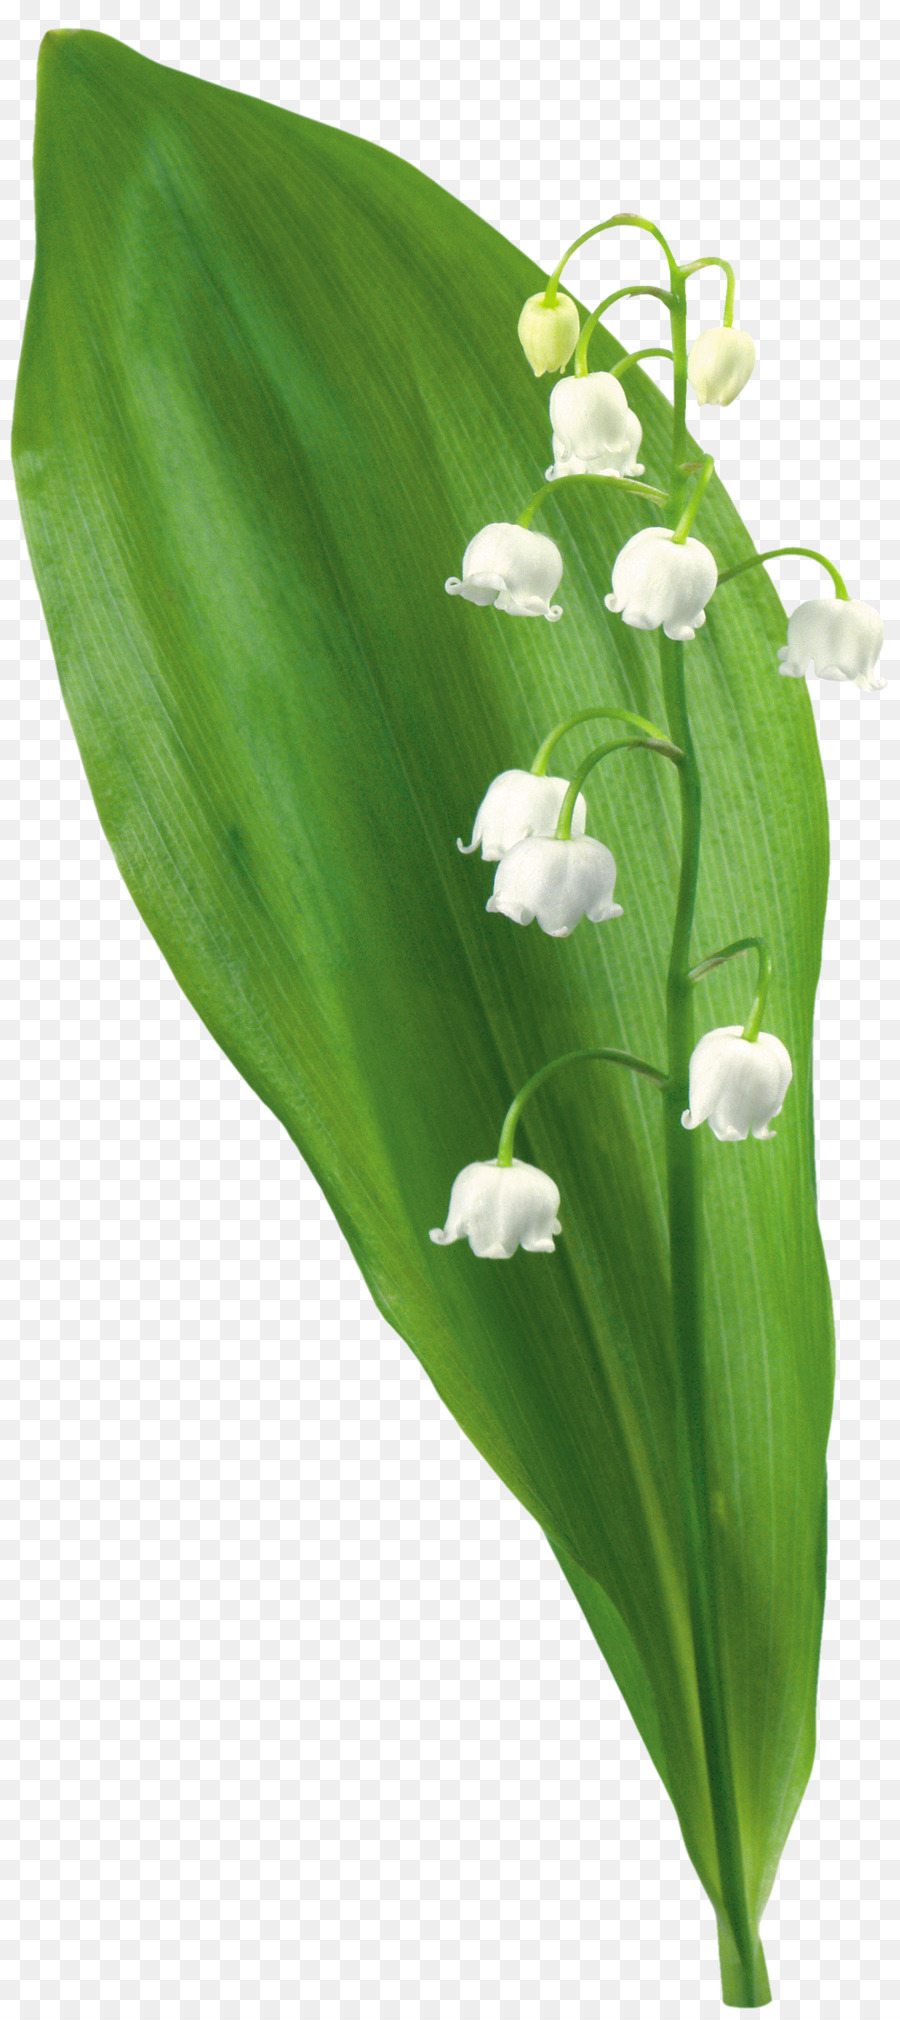 Blume, Pflanze, Baum clipart - Lily of the Valley